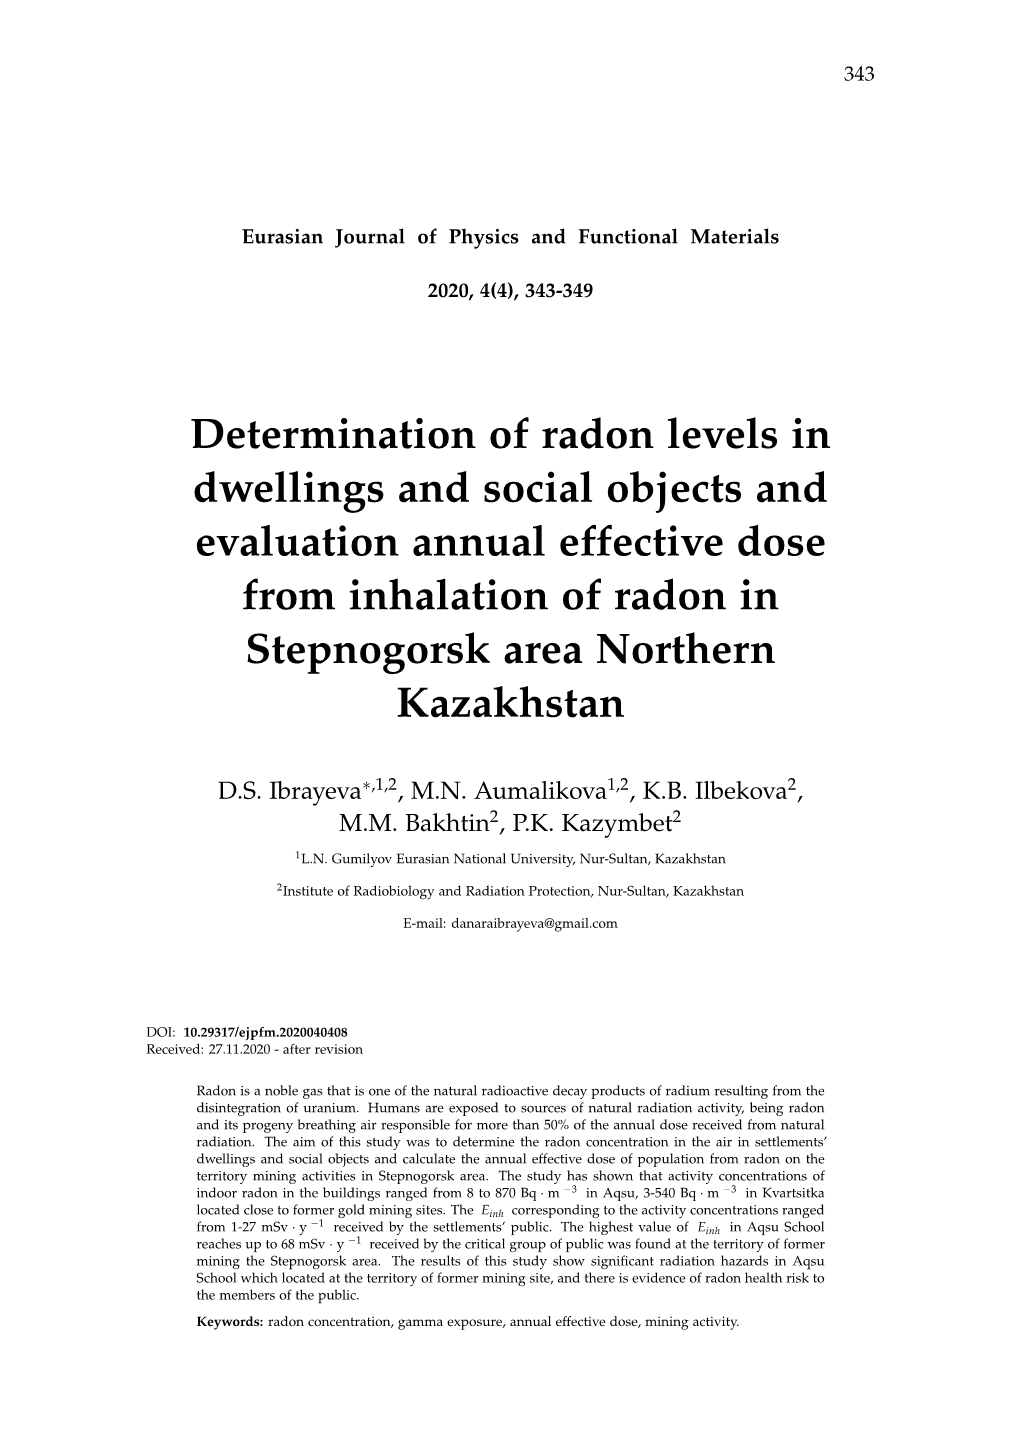 Determination of Radon Levels in Dwellings and Social Objects and Evaluation Annual Effective Dose from Inhalation of Radon in Stepnogorsk Area Northern Kazakhstan